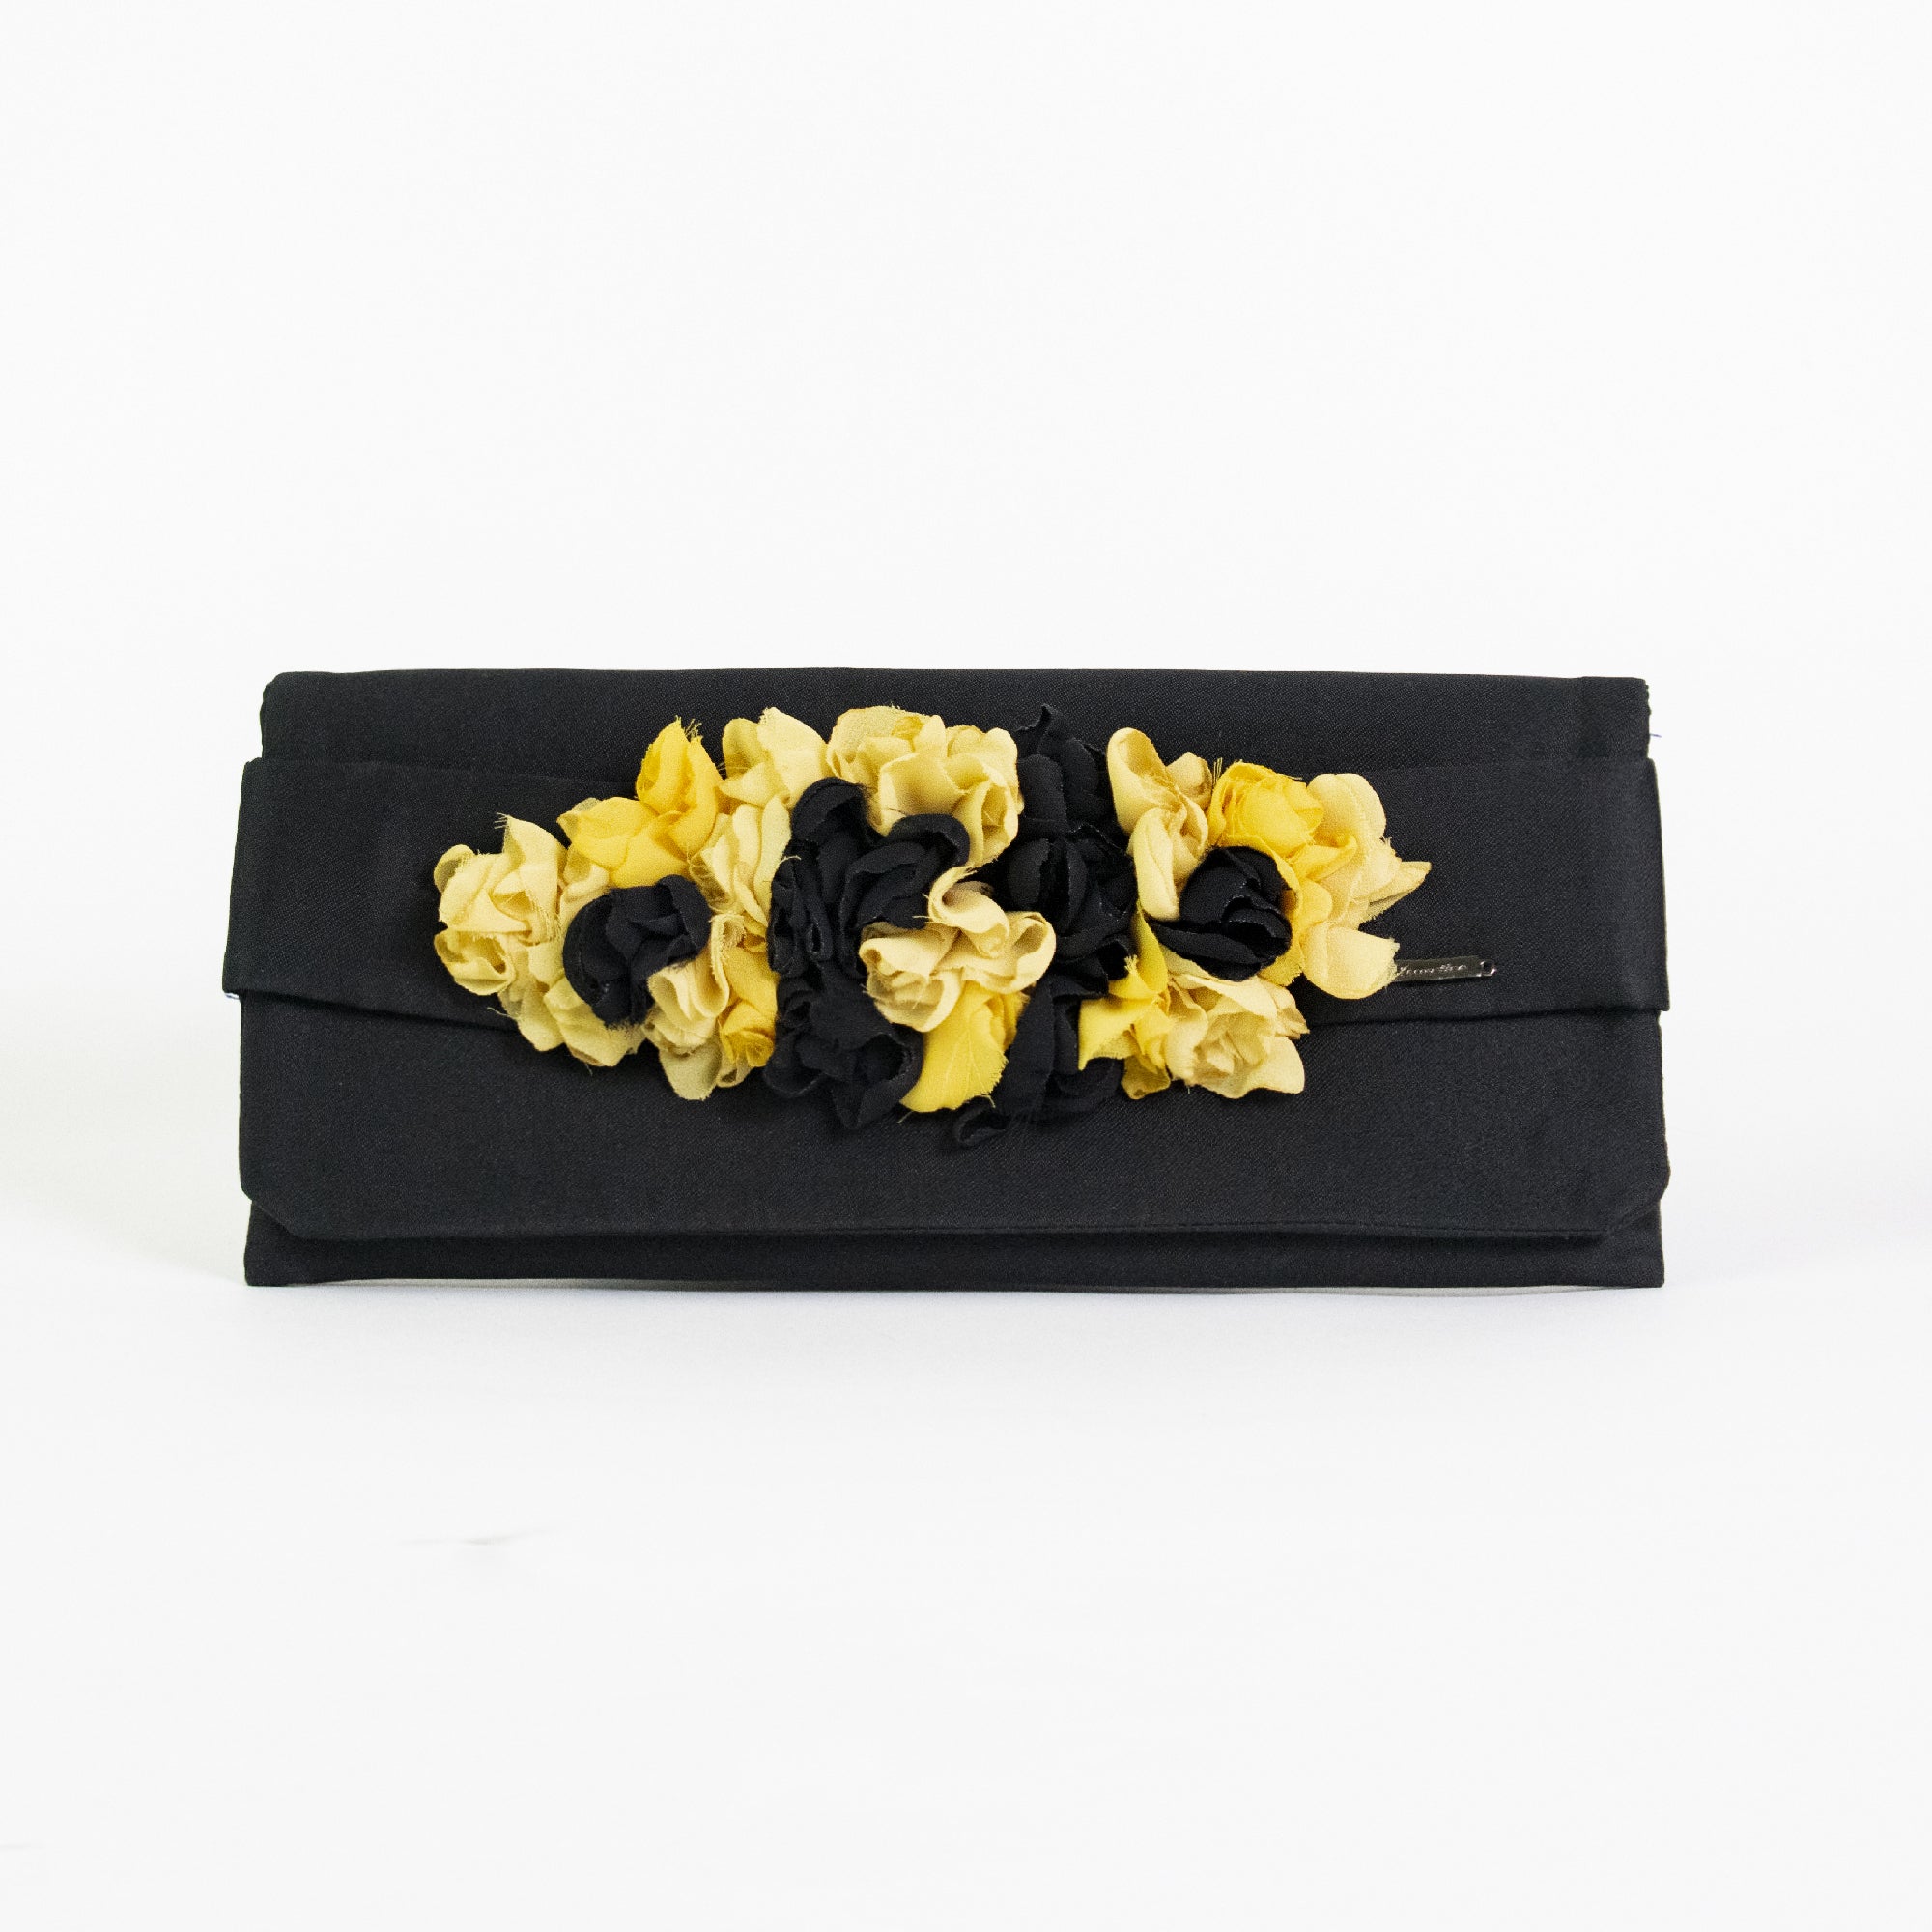 Black clutch bag with two-tone flowers